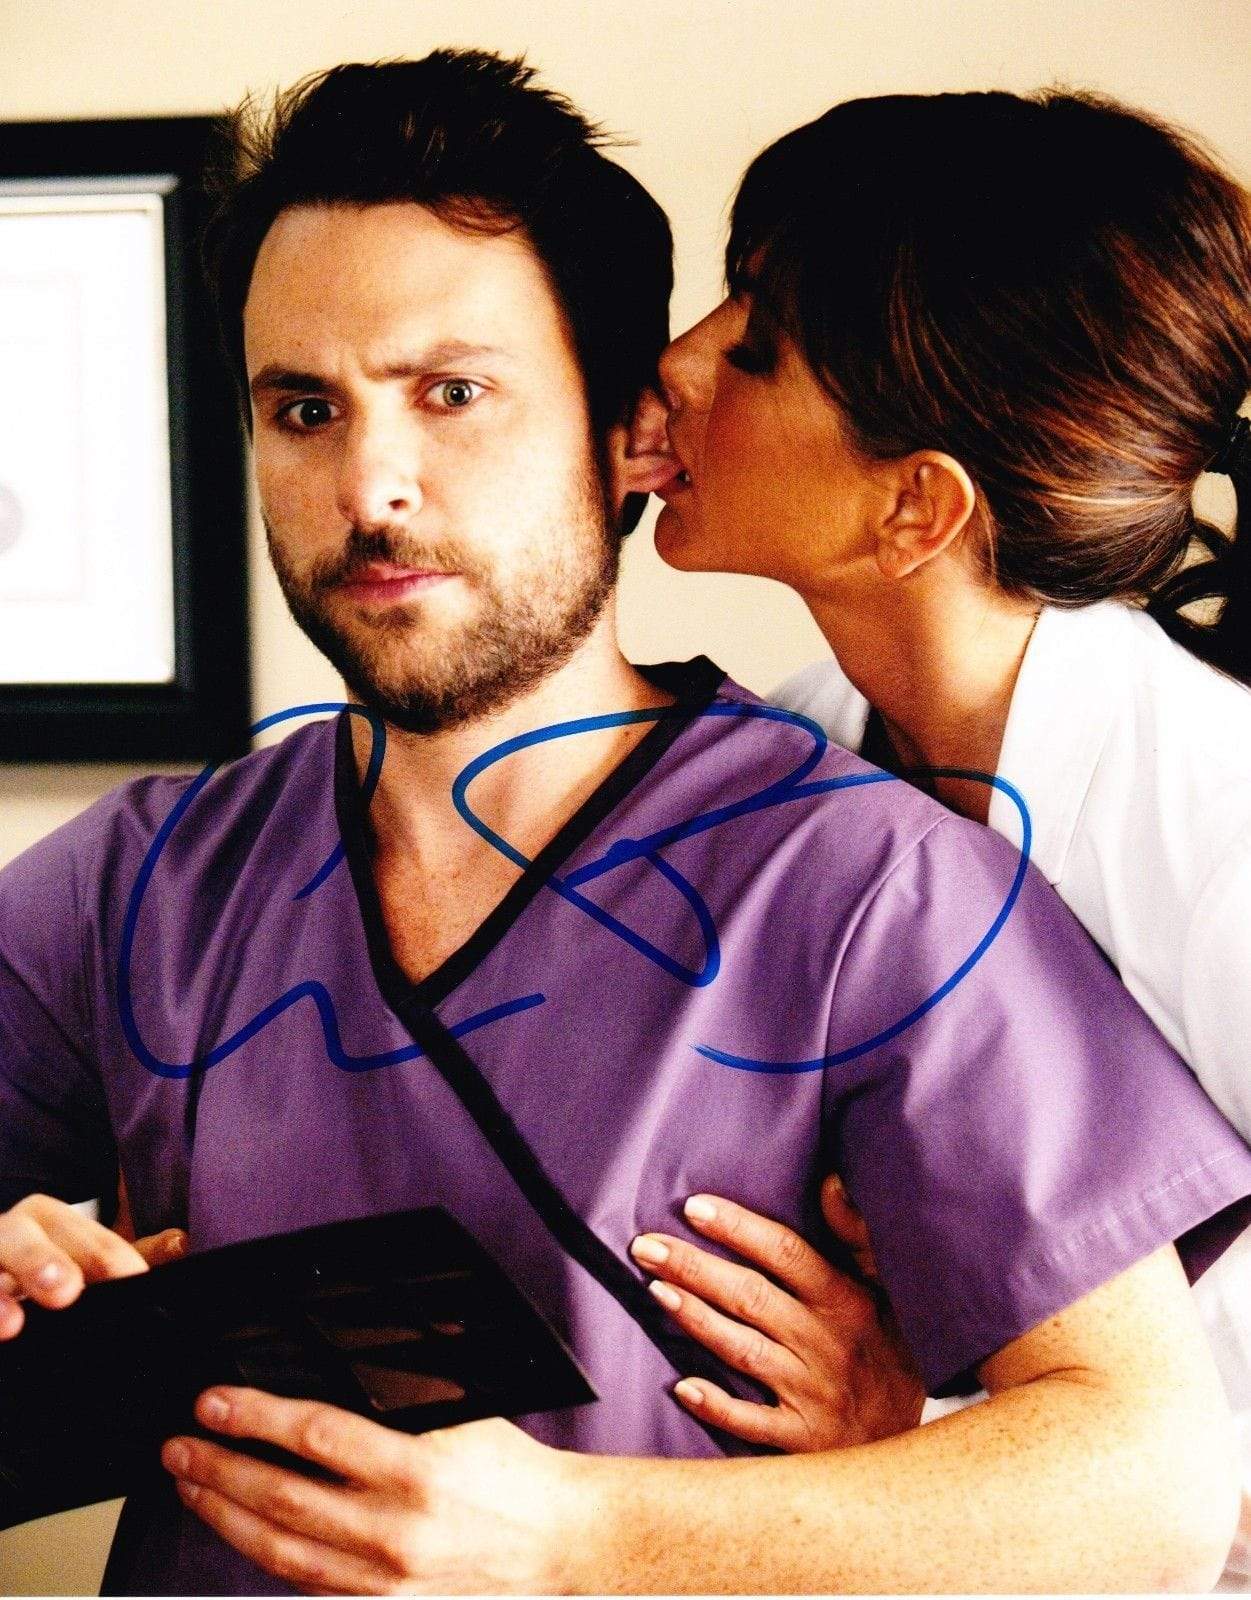 Charlie Day Authentic Autographed 8x10 Photo - Prime Time Signatures - TV & Film